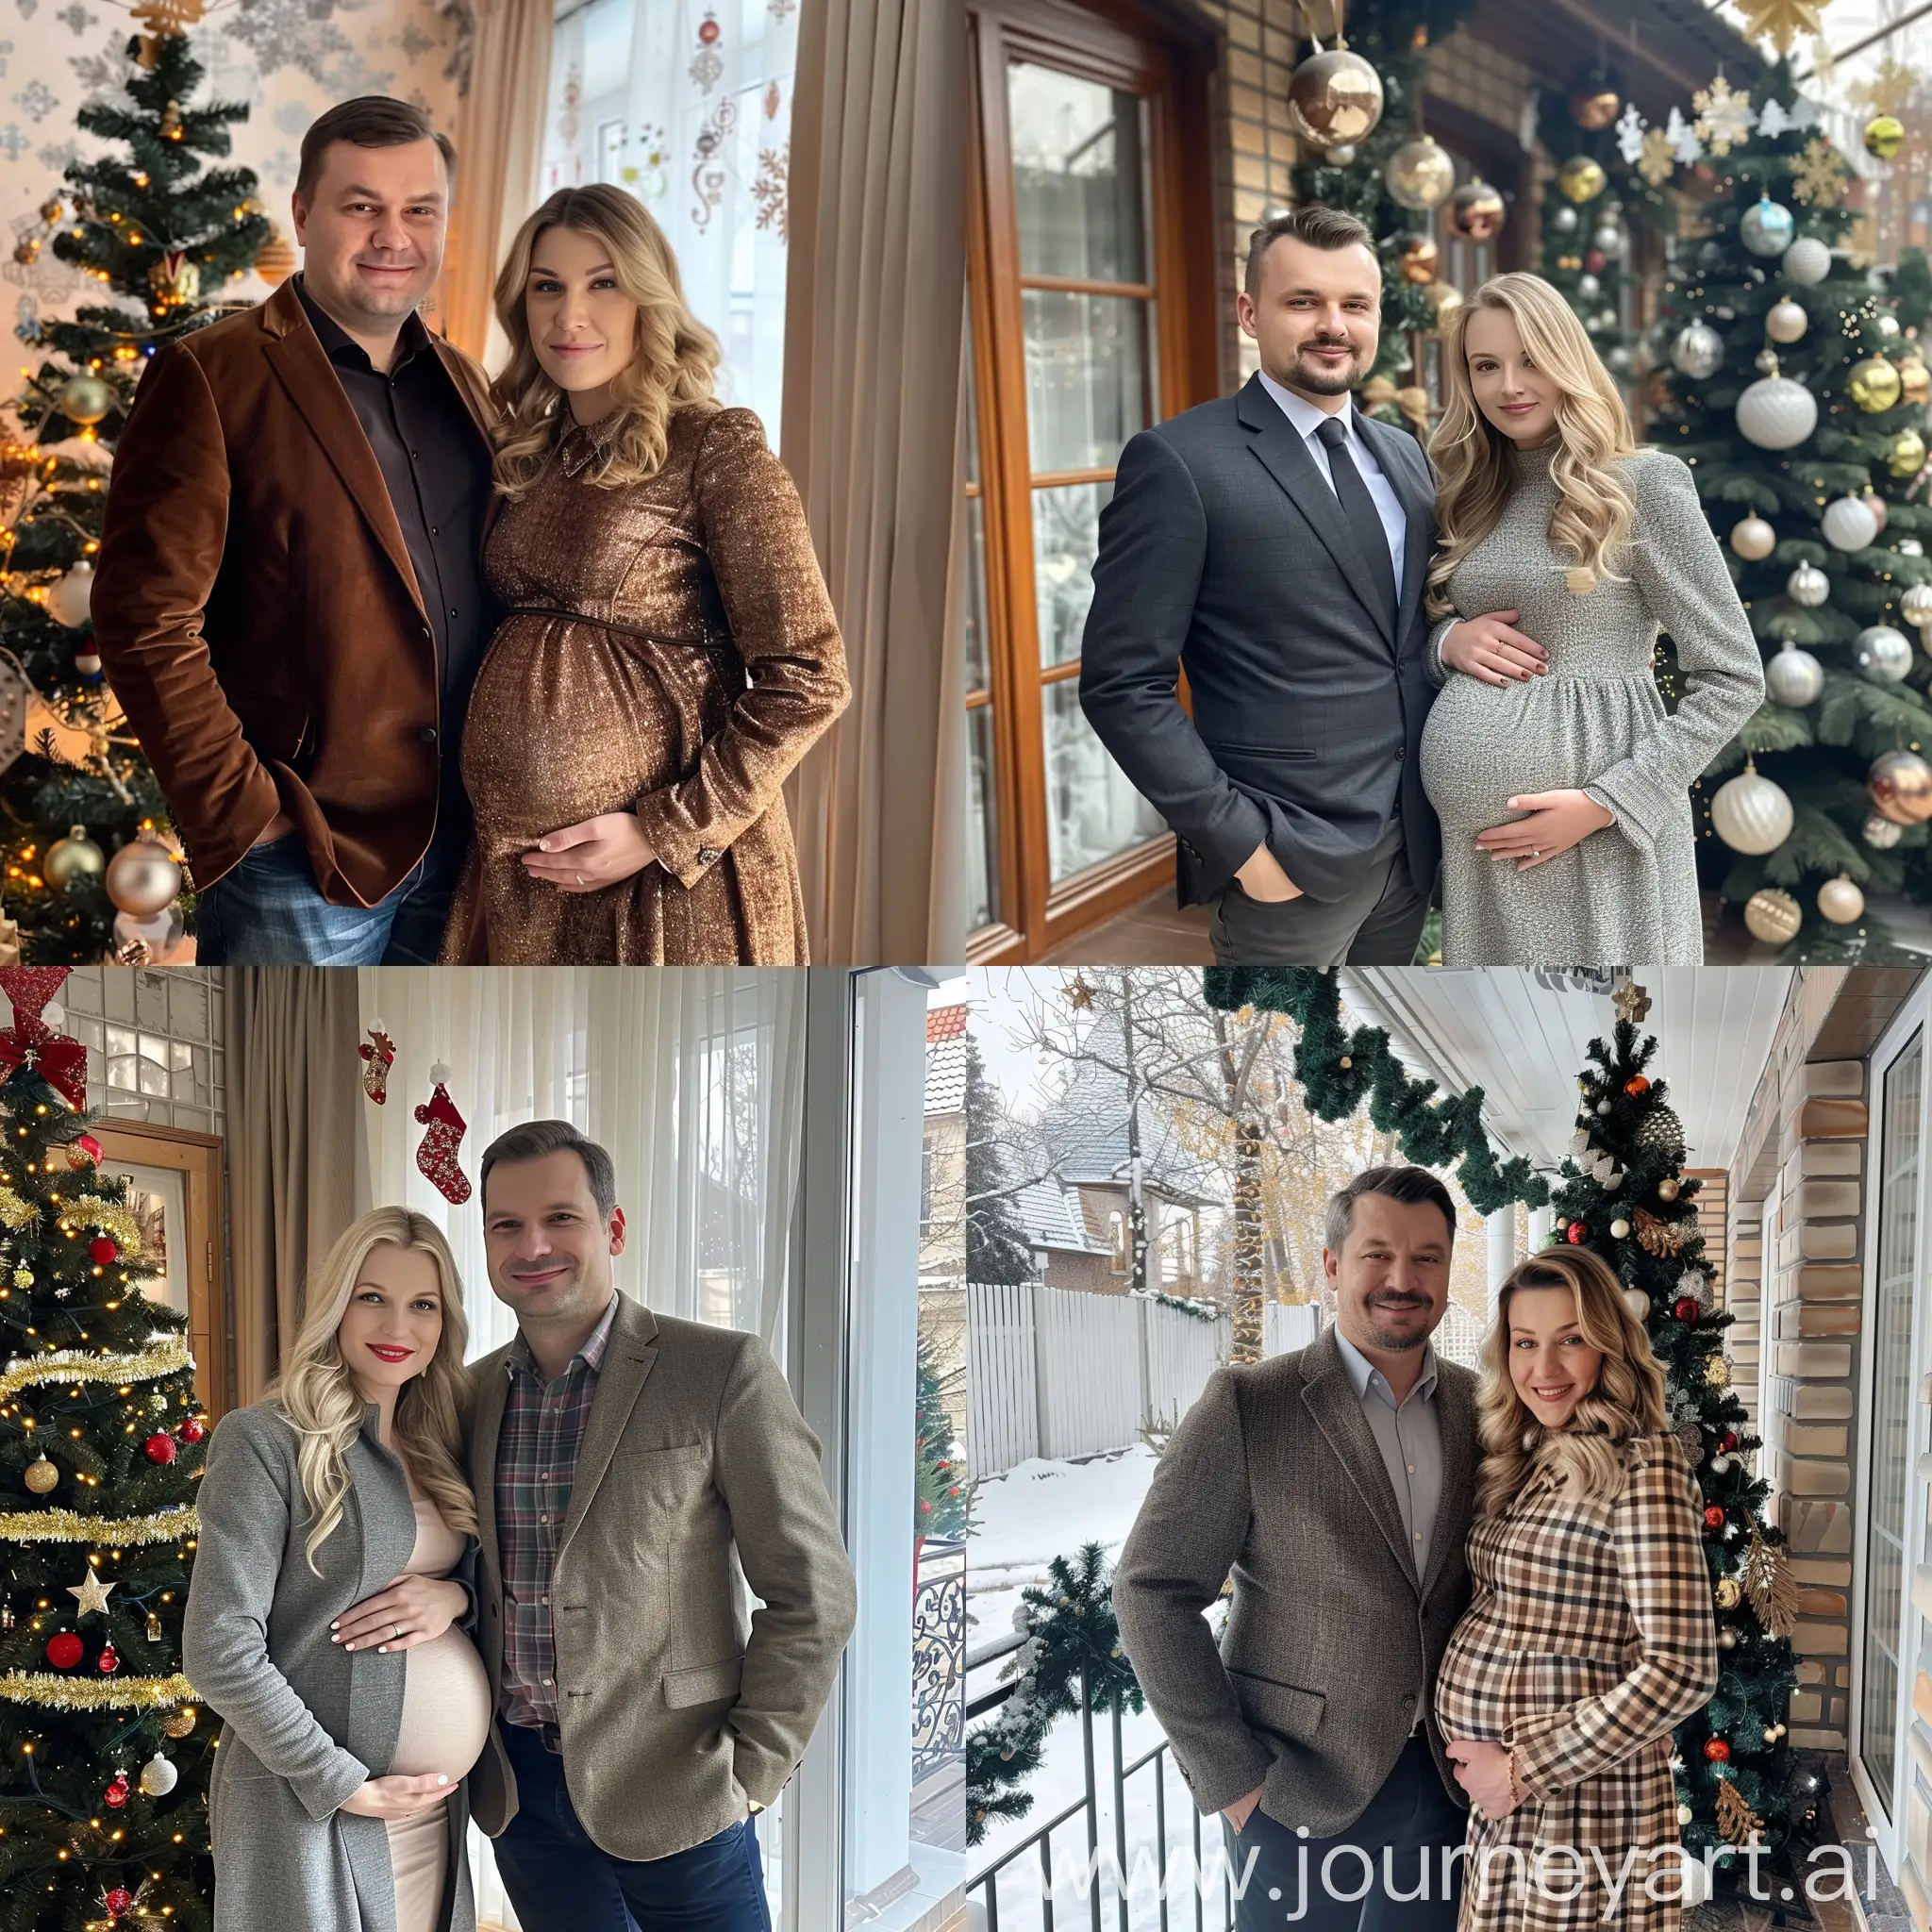 Photo: A Russian businessman man and a pregnant beautiful blonde girl are standing together at home in the photo together, next to the Christmas tree and the house is decorated for the new year.